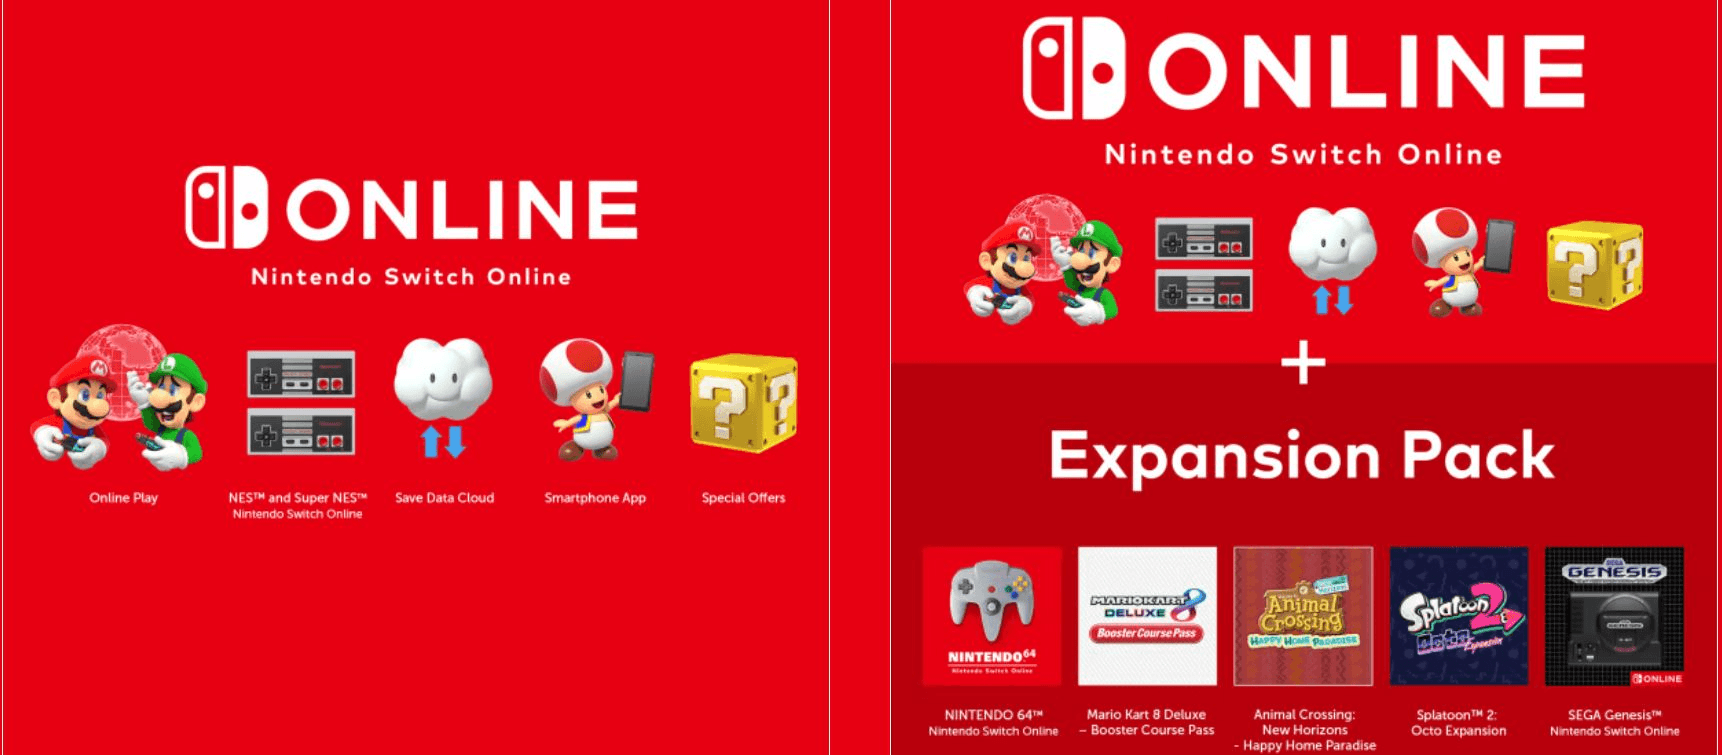 Nintendo Switch Online offering online multiplayer games, expansion packs for your favorite games, SNES games and NES games and cloud saves. 